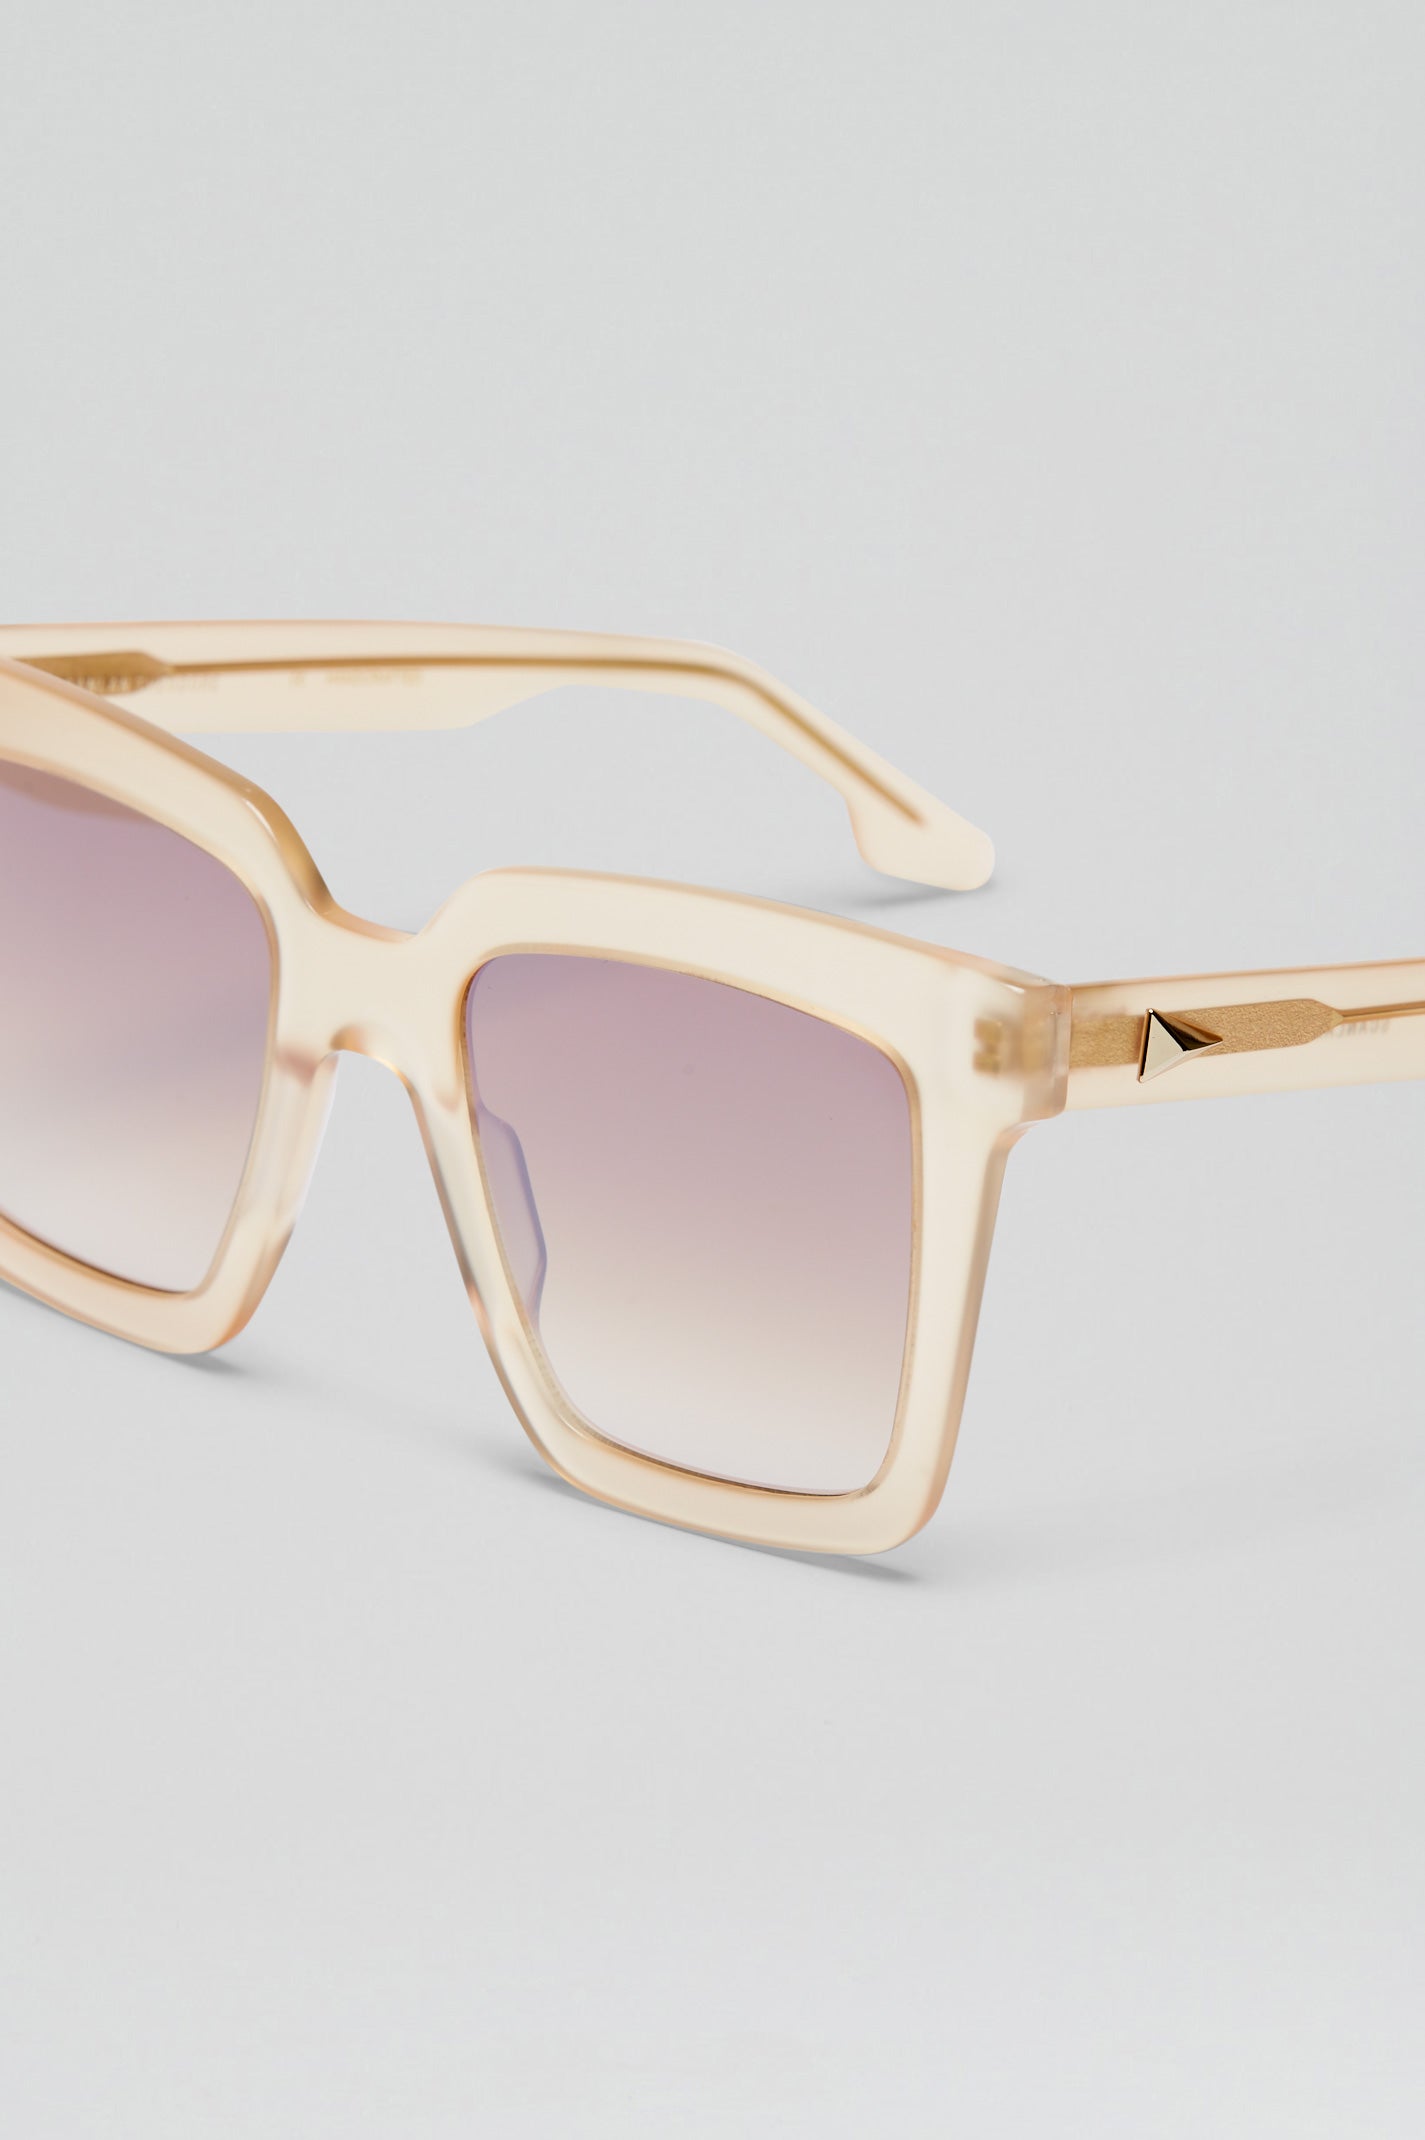 ST SQUARE SUNGLASSES - FROSTED.APRICOT - Scanlan Theodore